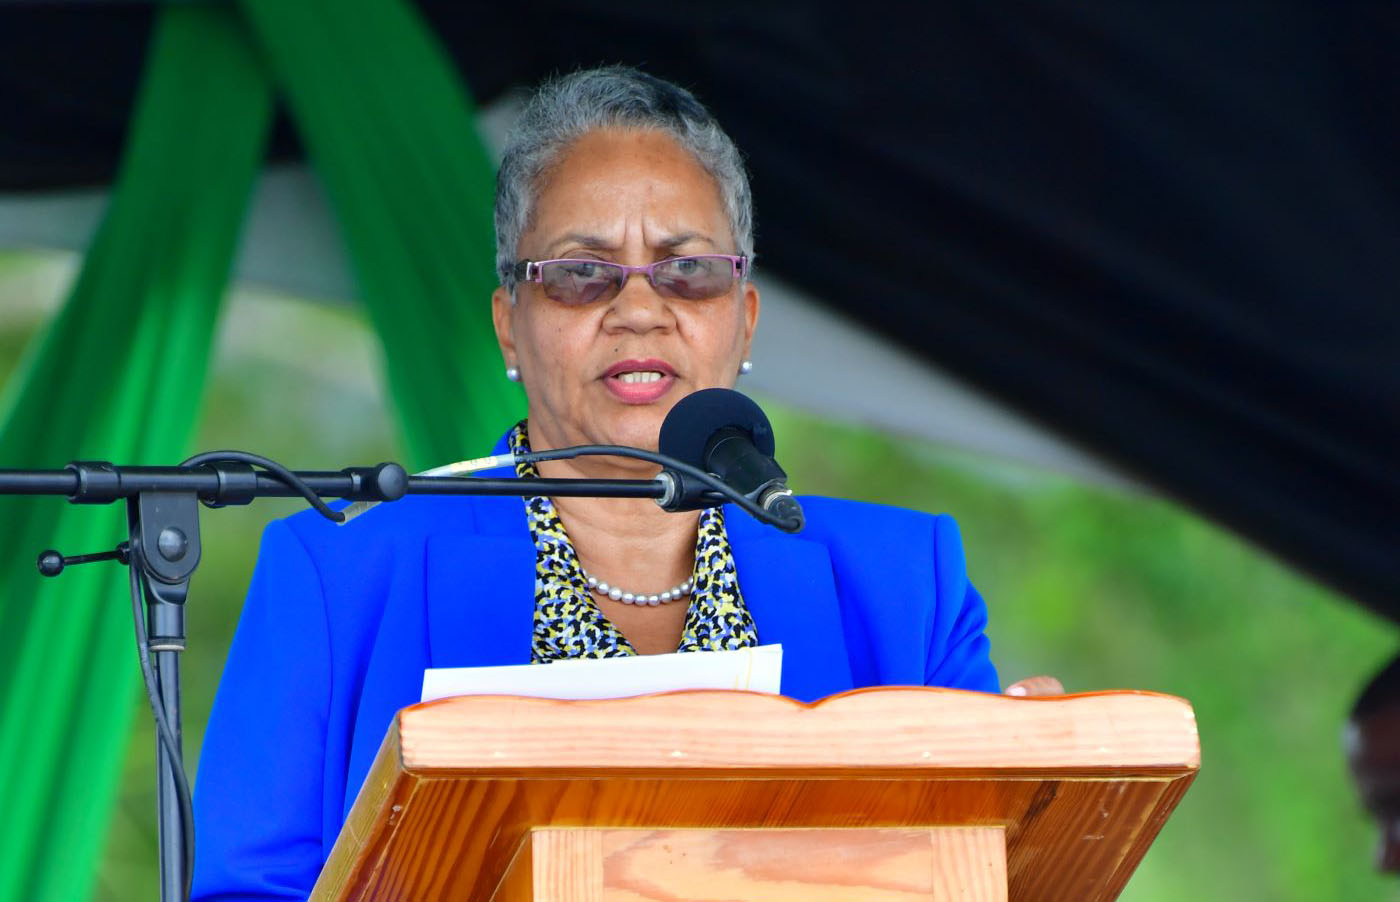 CDB Vice President Monica La Bennett speaking at the launch of the St. Vincent Geothermal Project